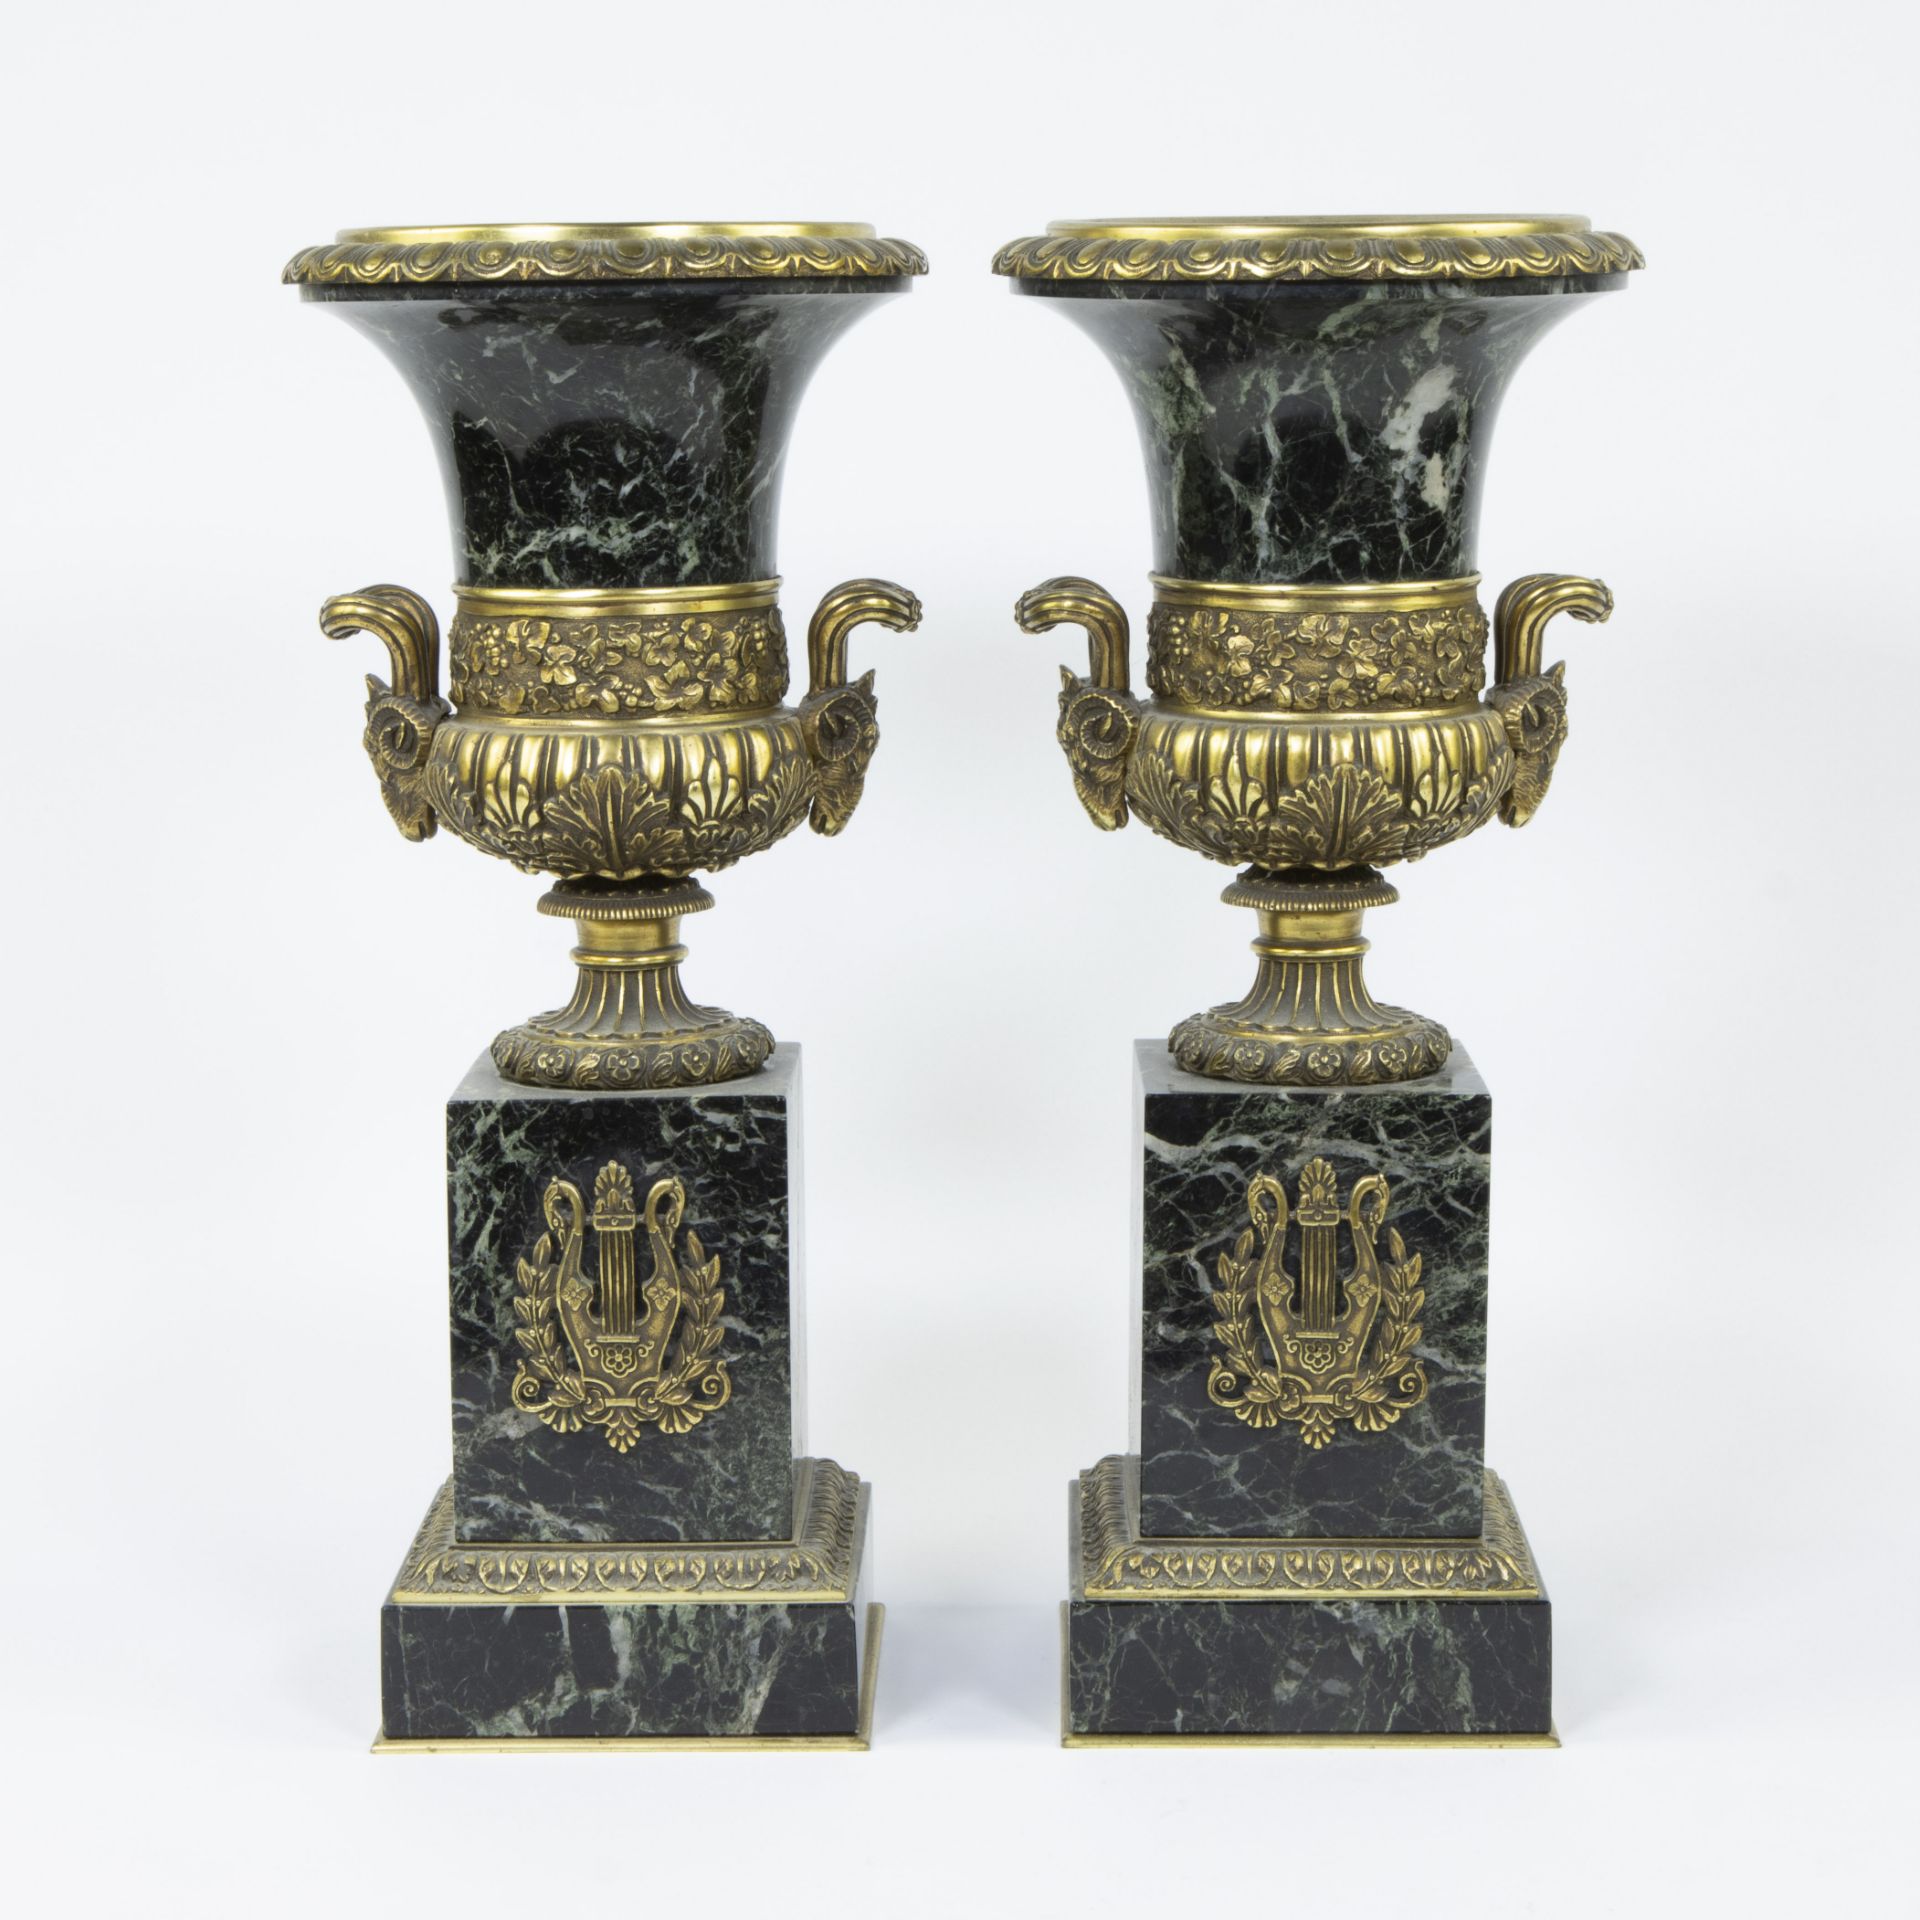 Pair of green-veined marble French Empire urns with gilt bronze fittings